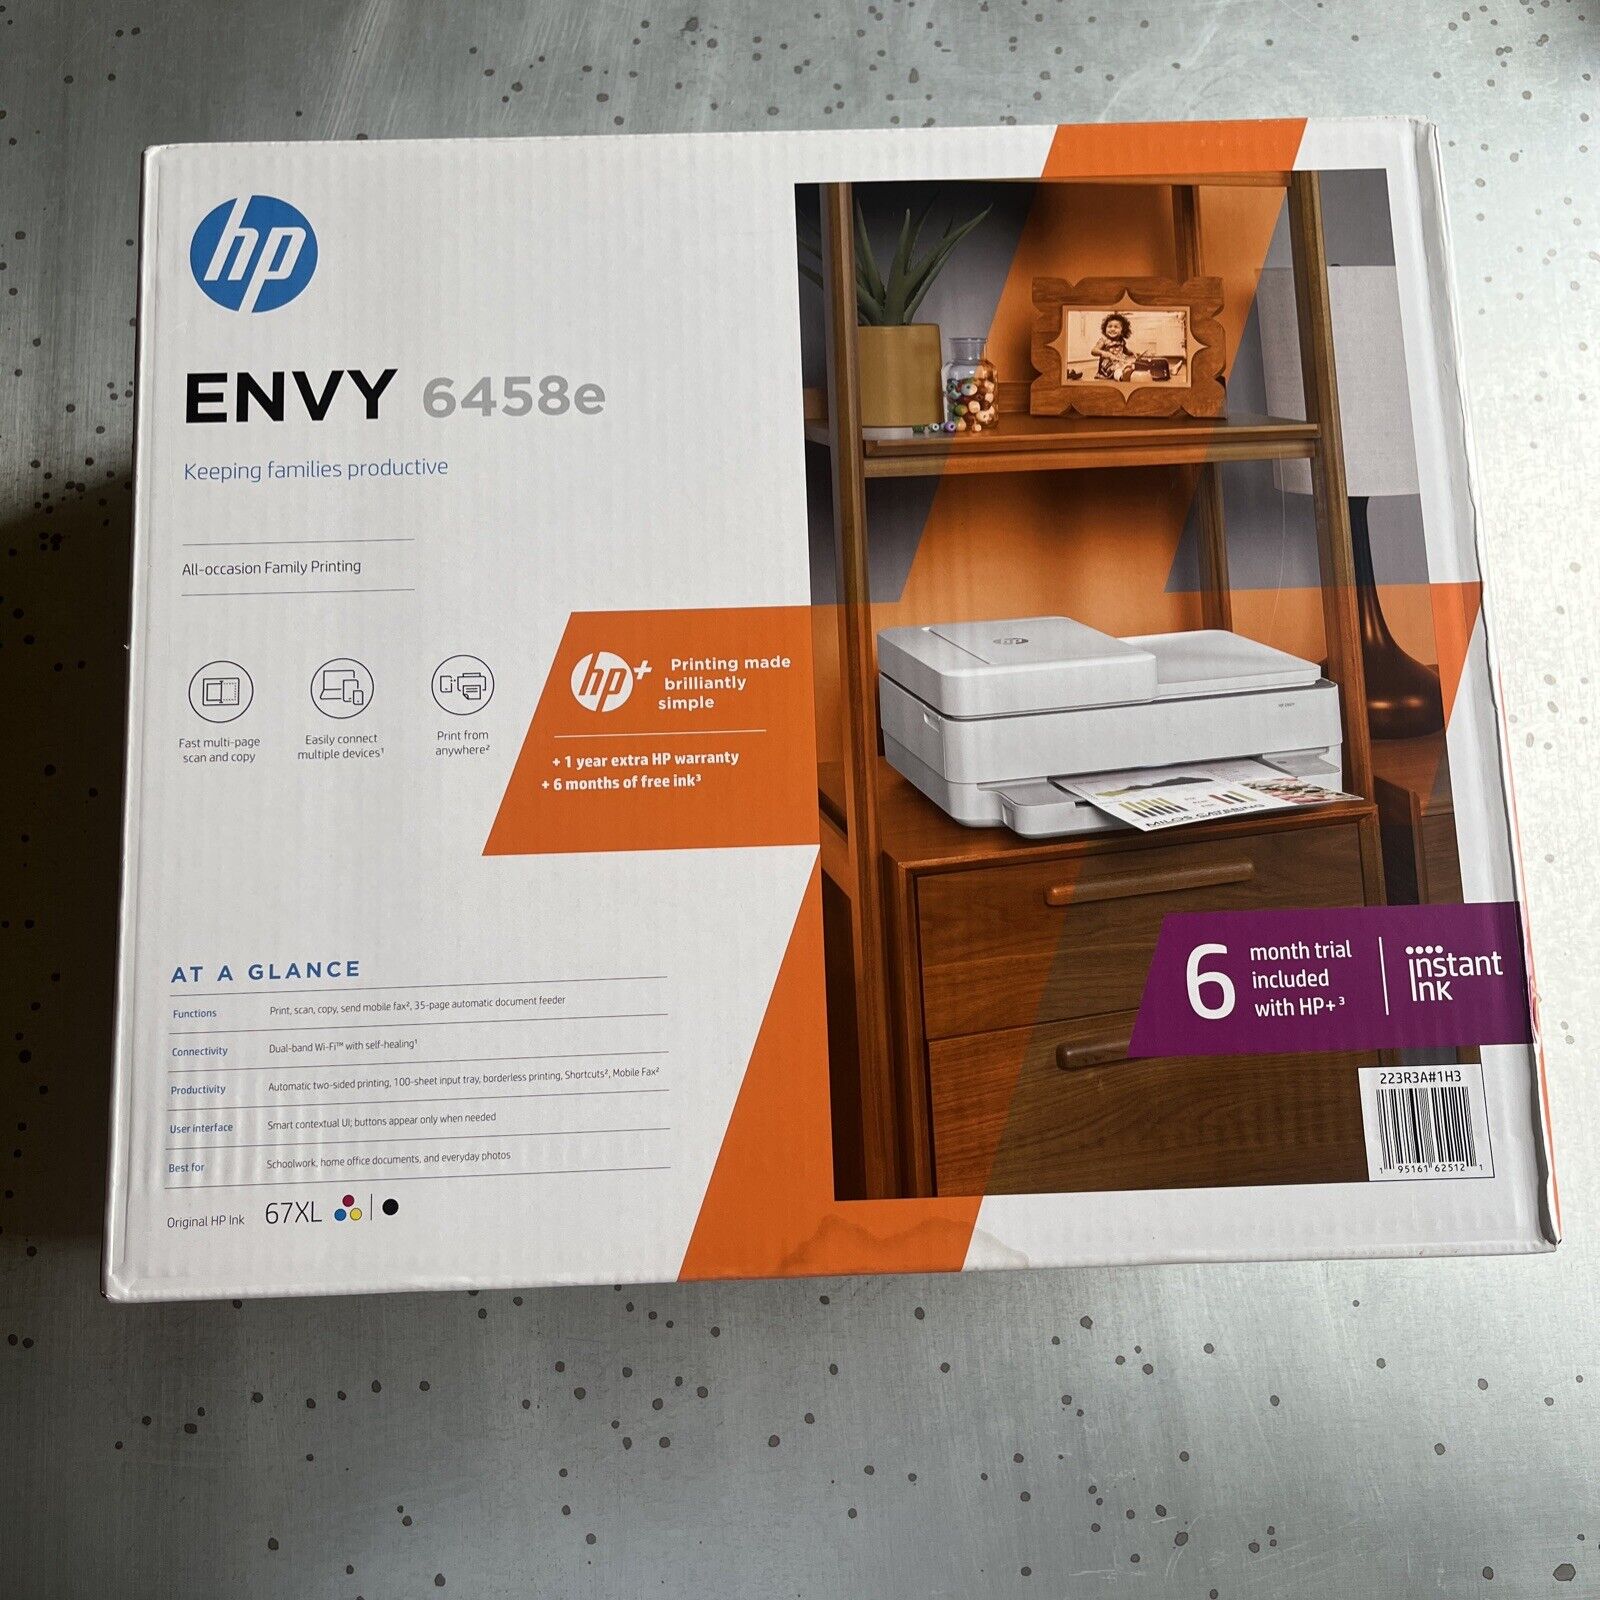 HP ENVY 6458e All-in-One Wireless Color Printer (New Never Opened)